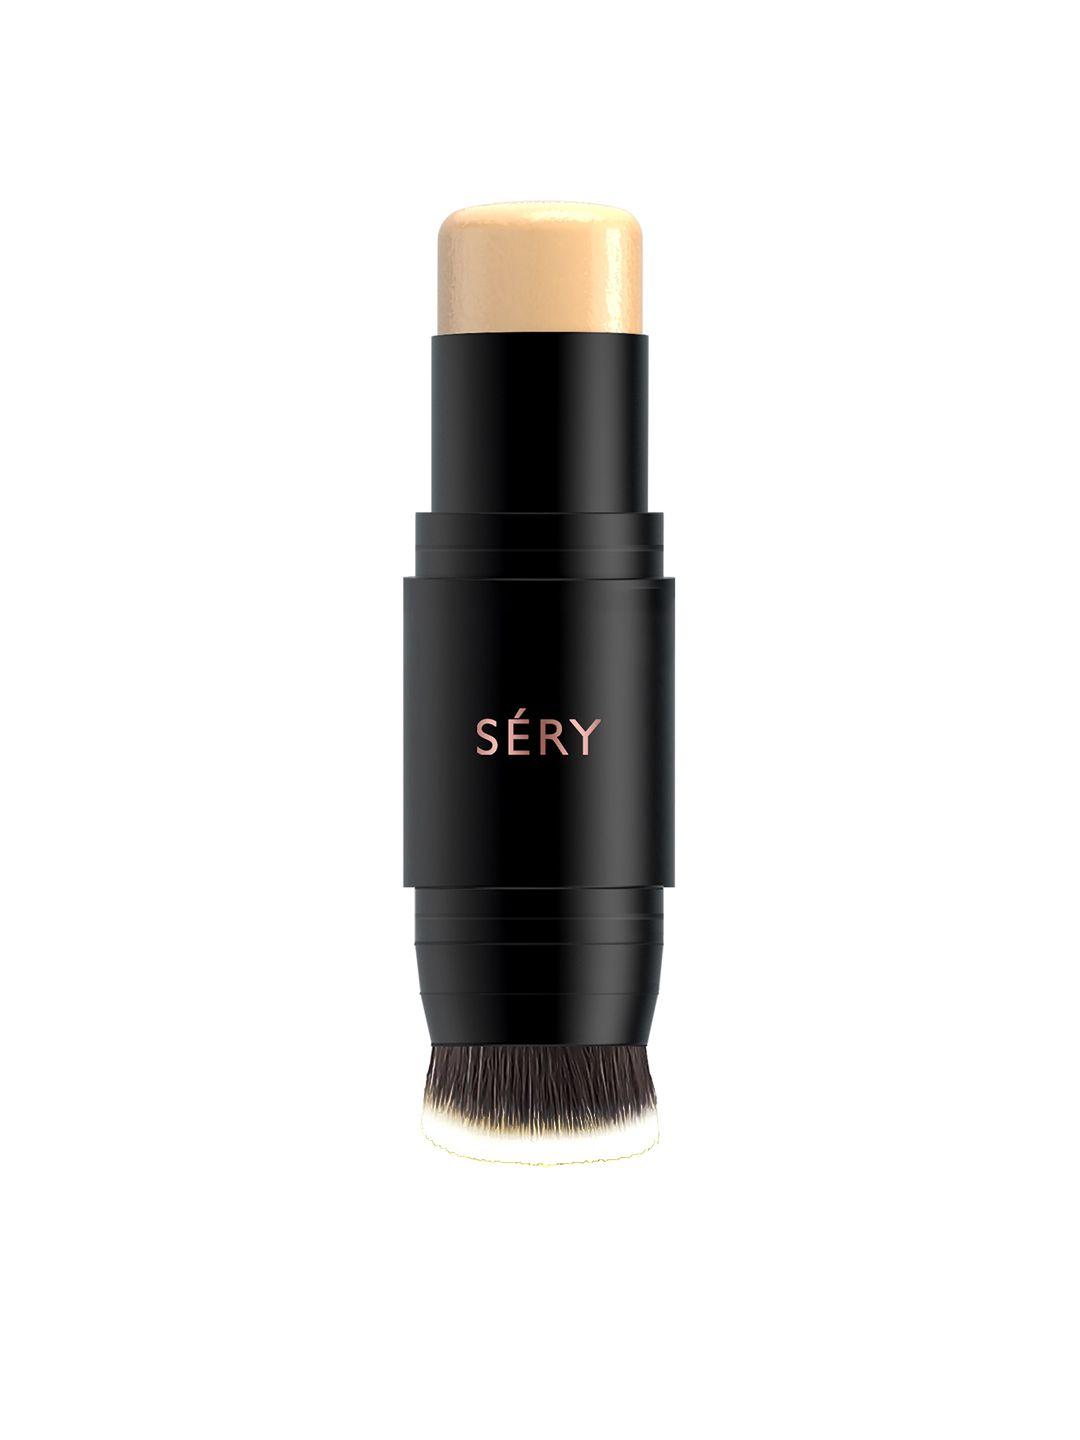 sery long-lasting fix n click foundation stick with red raspberry 7.5g - ivory